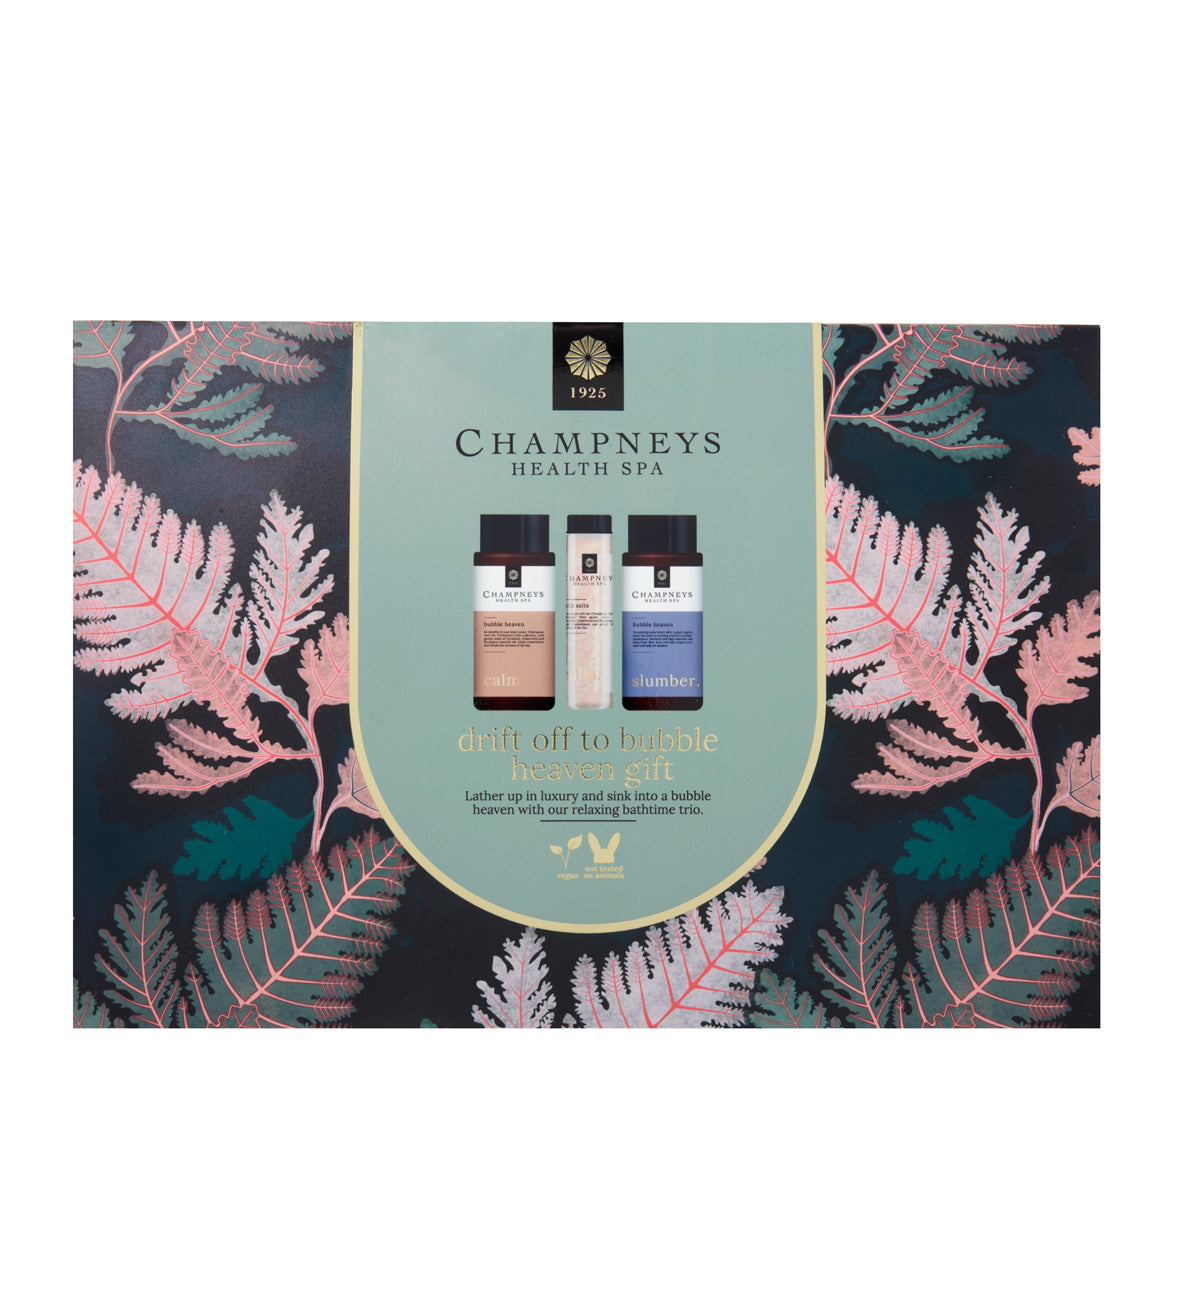 Champneys Drift Off to Bubble Heaven Gift